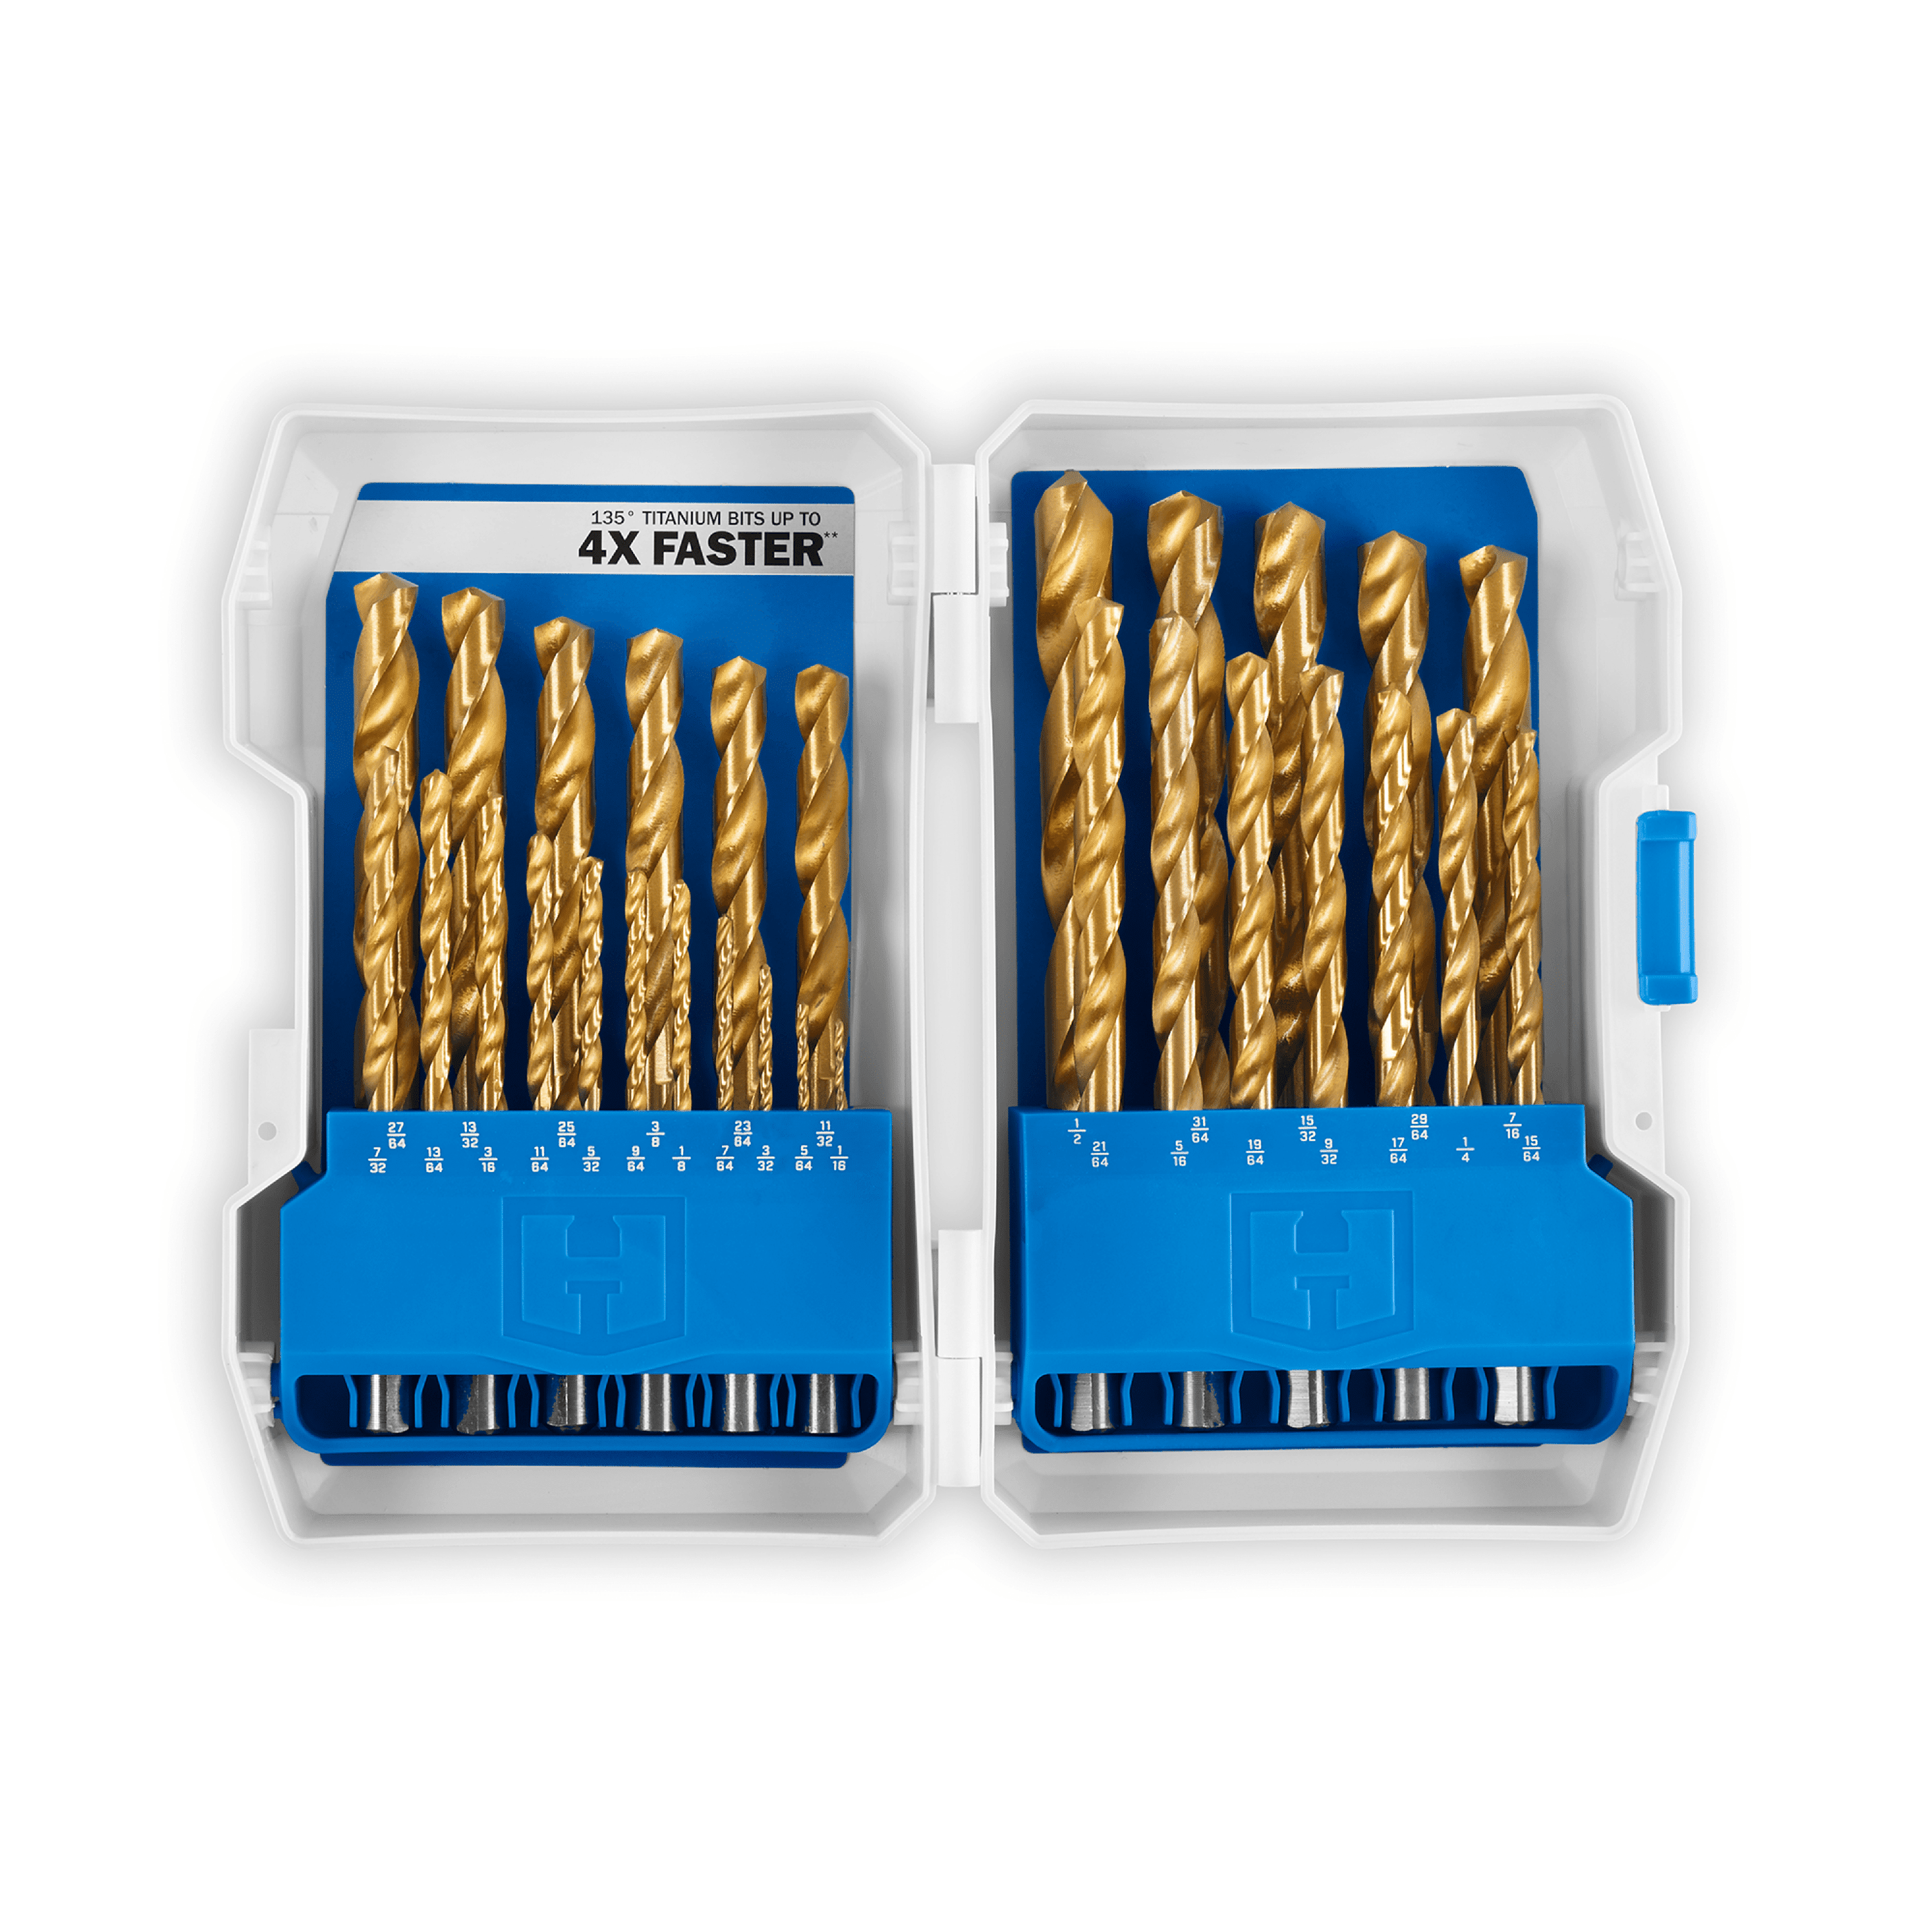 15 Piece Drill Bit Set Trade Quality For Metal & Wood in Wooden Box 